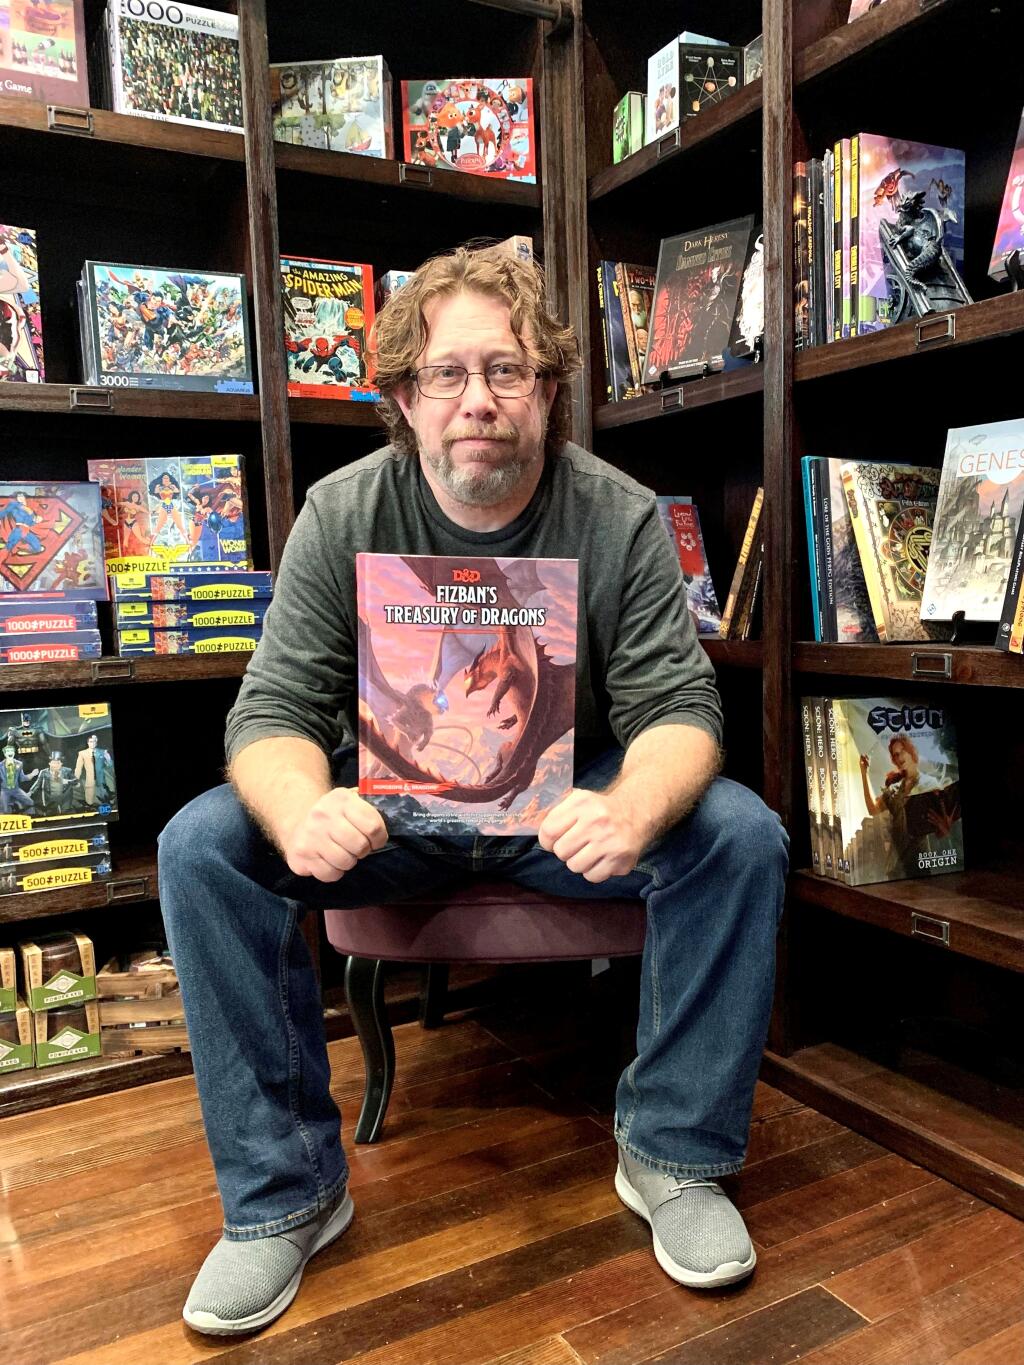 Bryan “Ted” Woolley loves monsters. Now he co-owns a Petaluma store named for goblins and devoted to playing games featuring dragons. (COURTESY OF TED WOOLLEY)